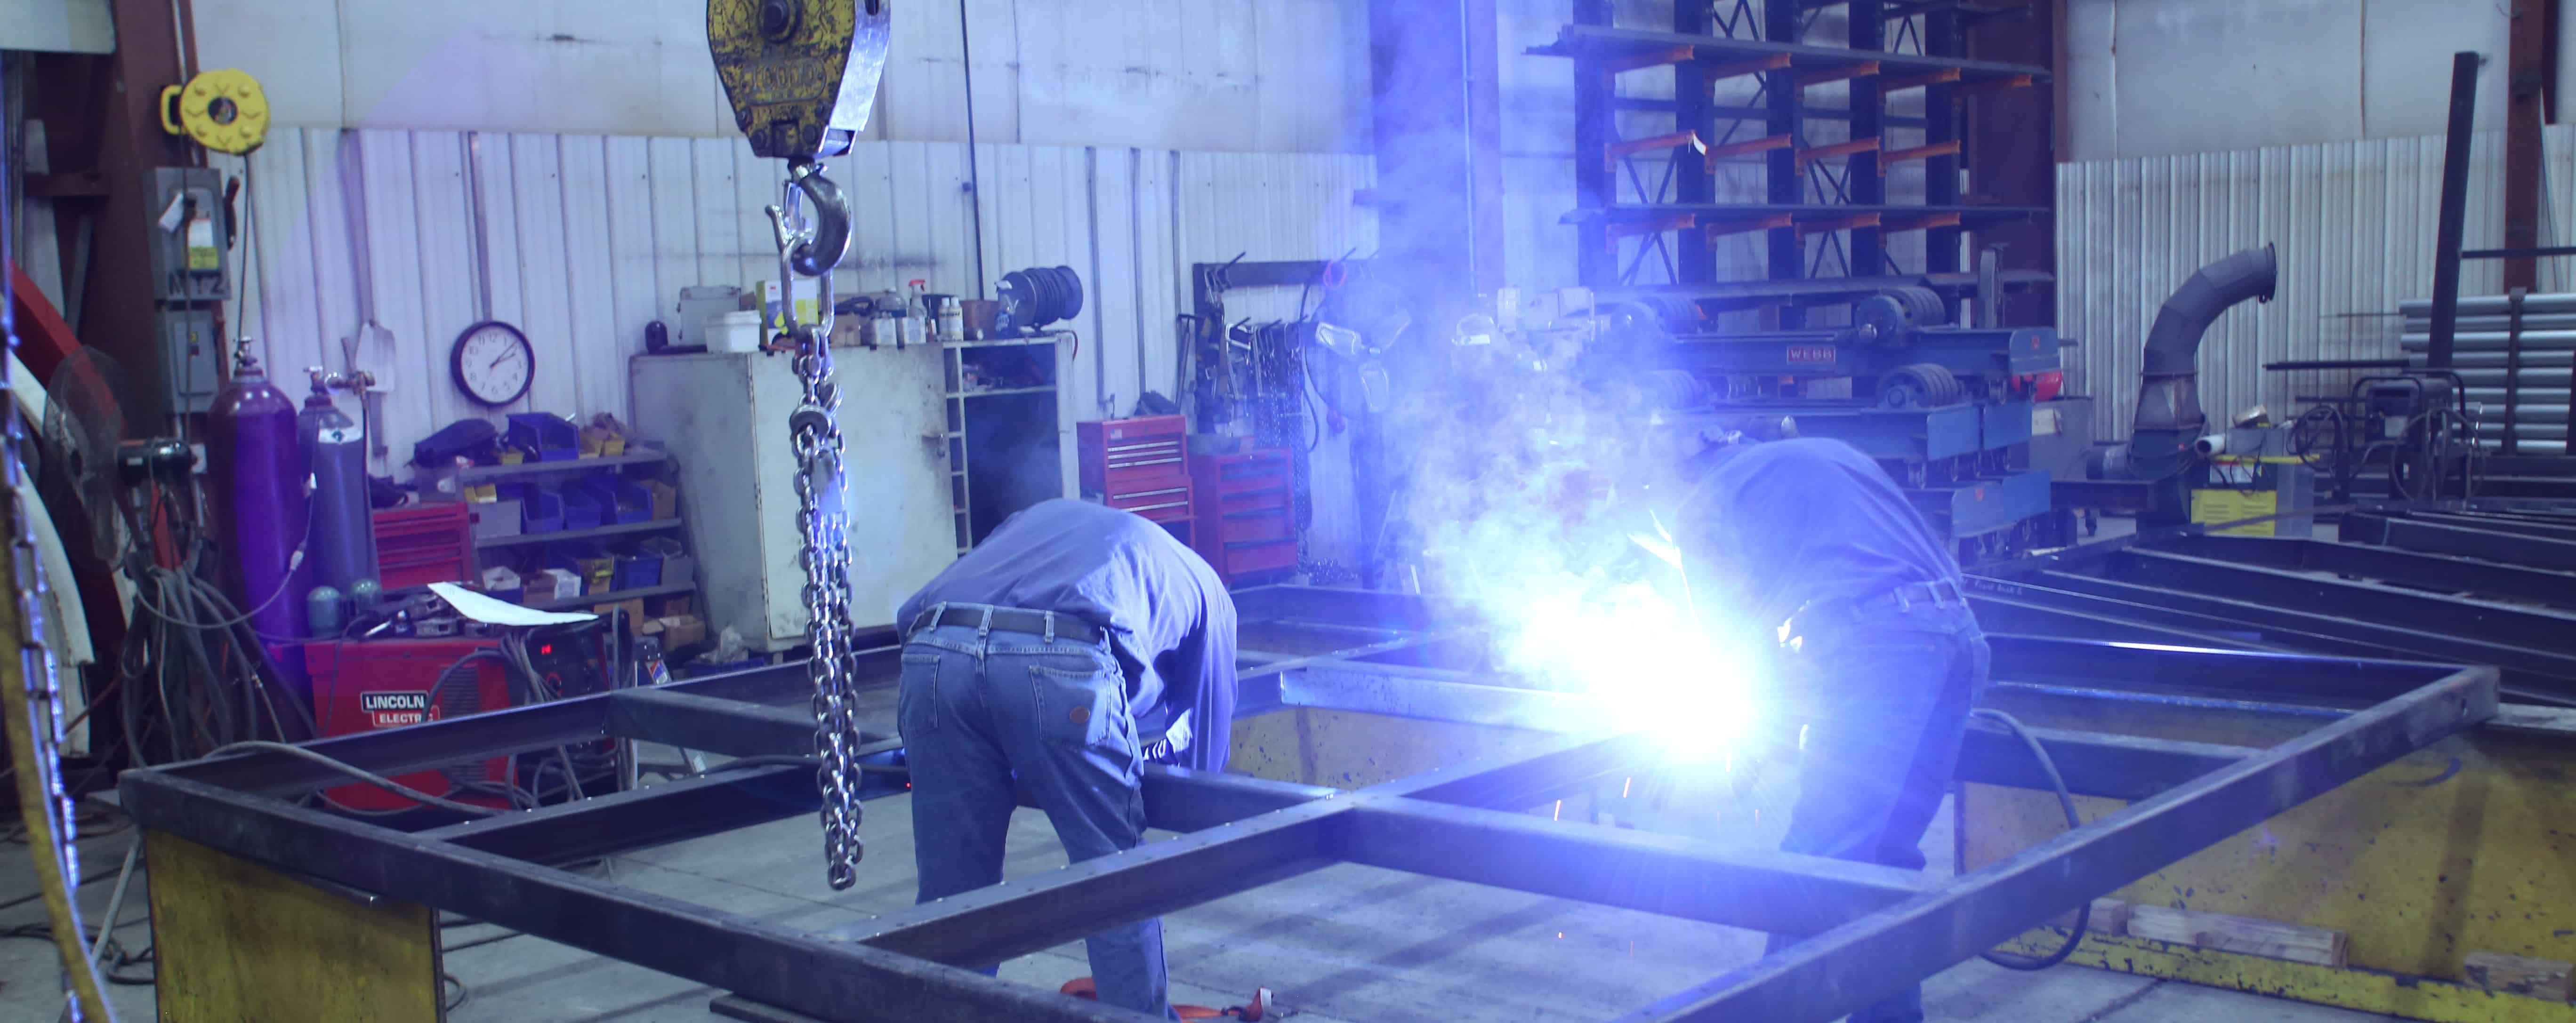 Industrial ventilation systems protect workers from welding fumes